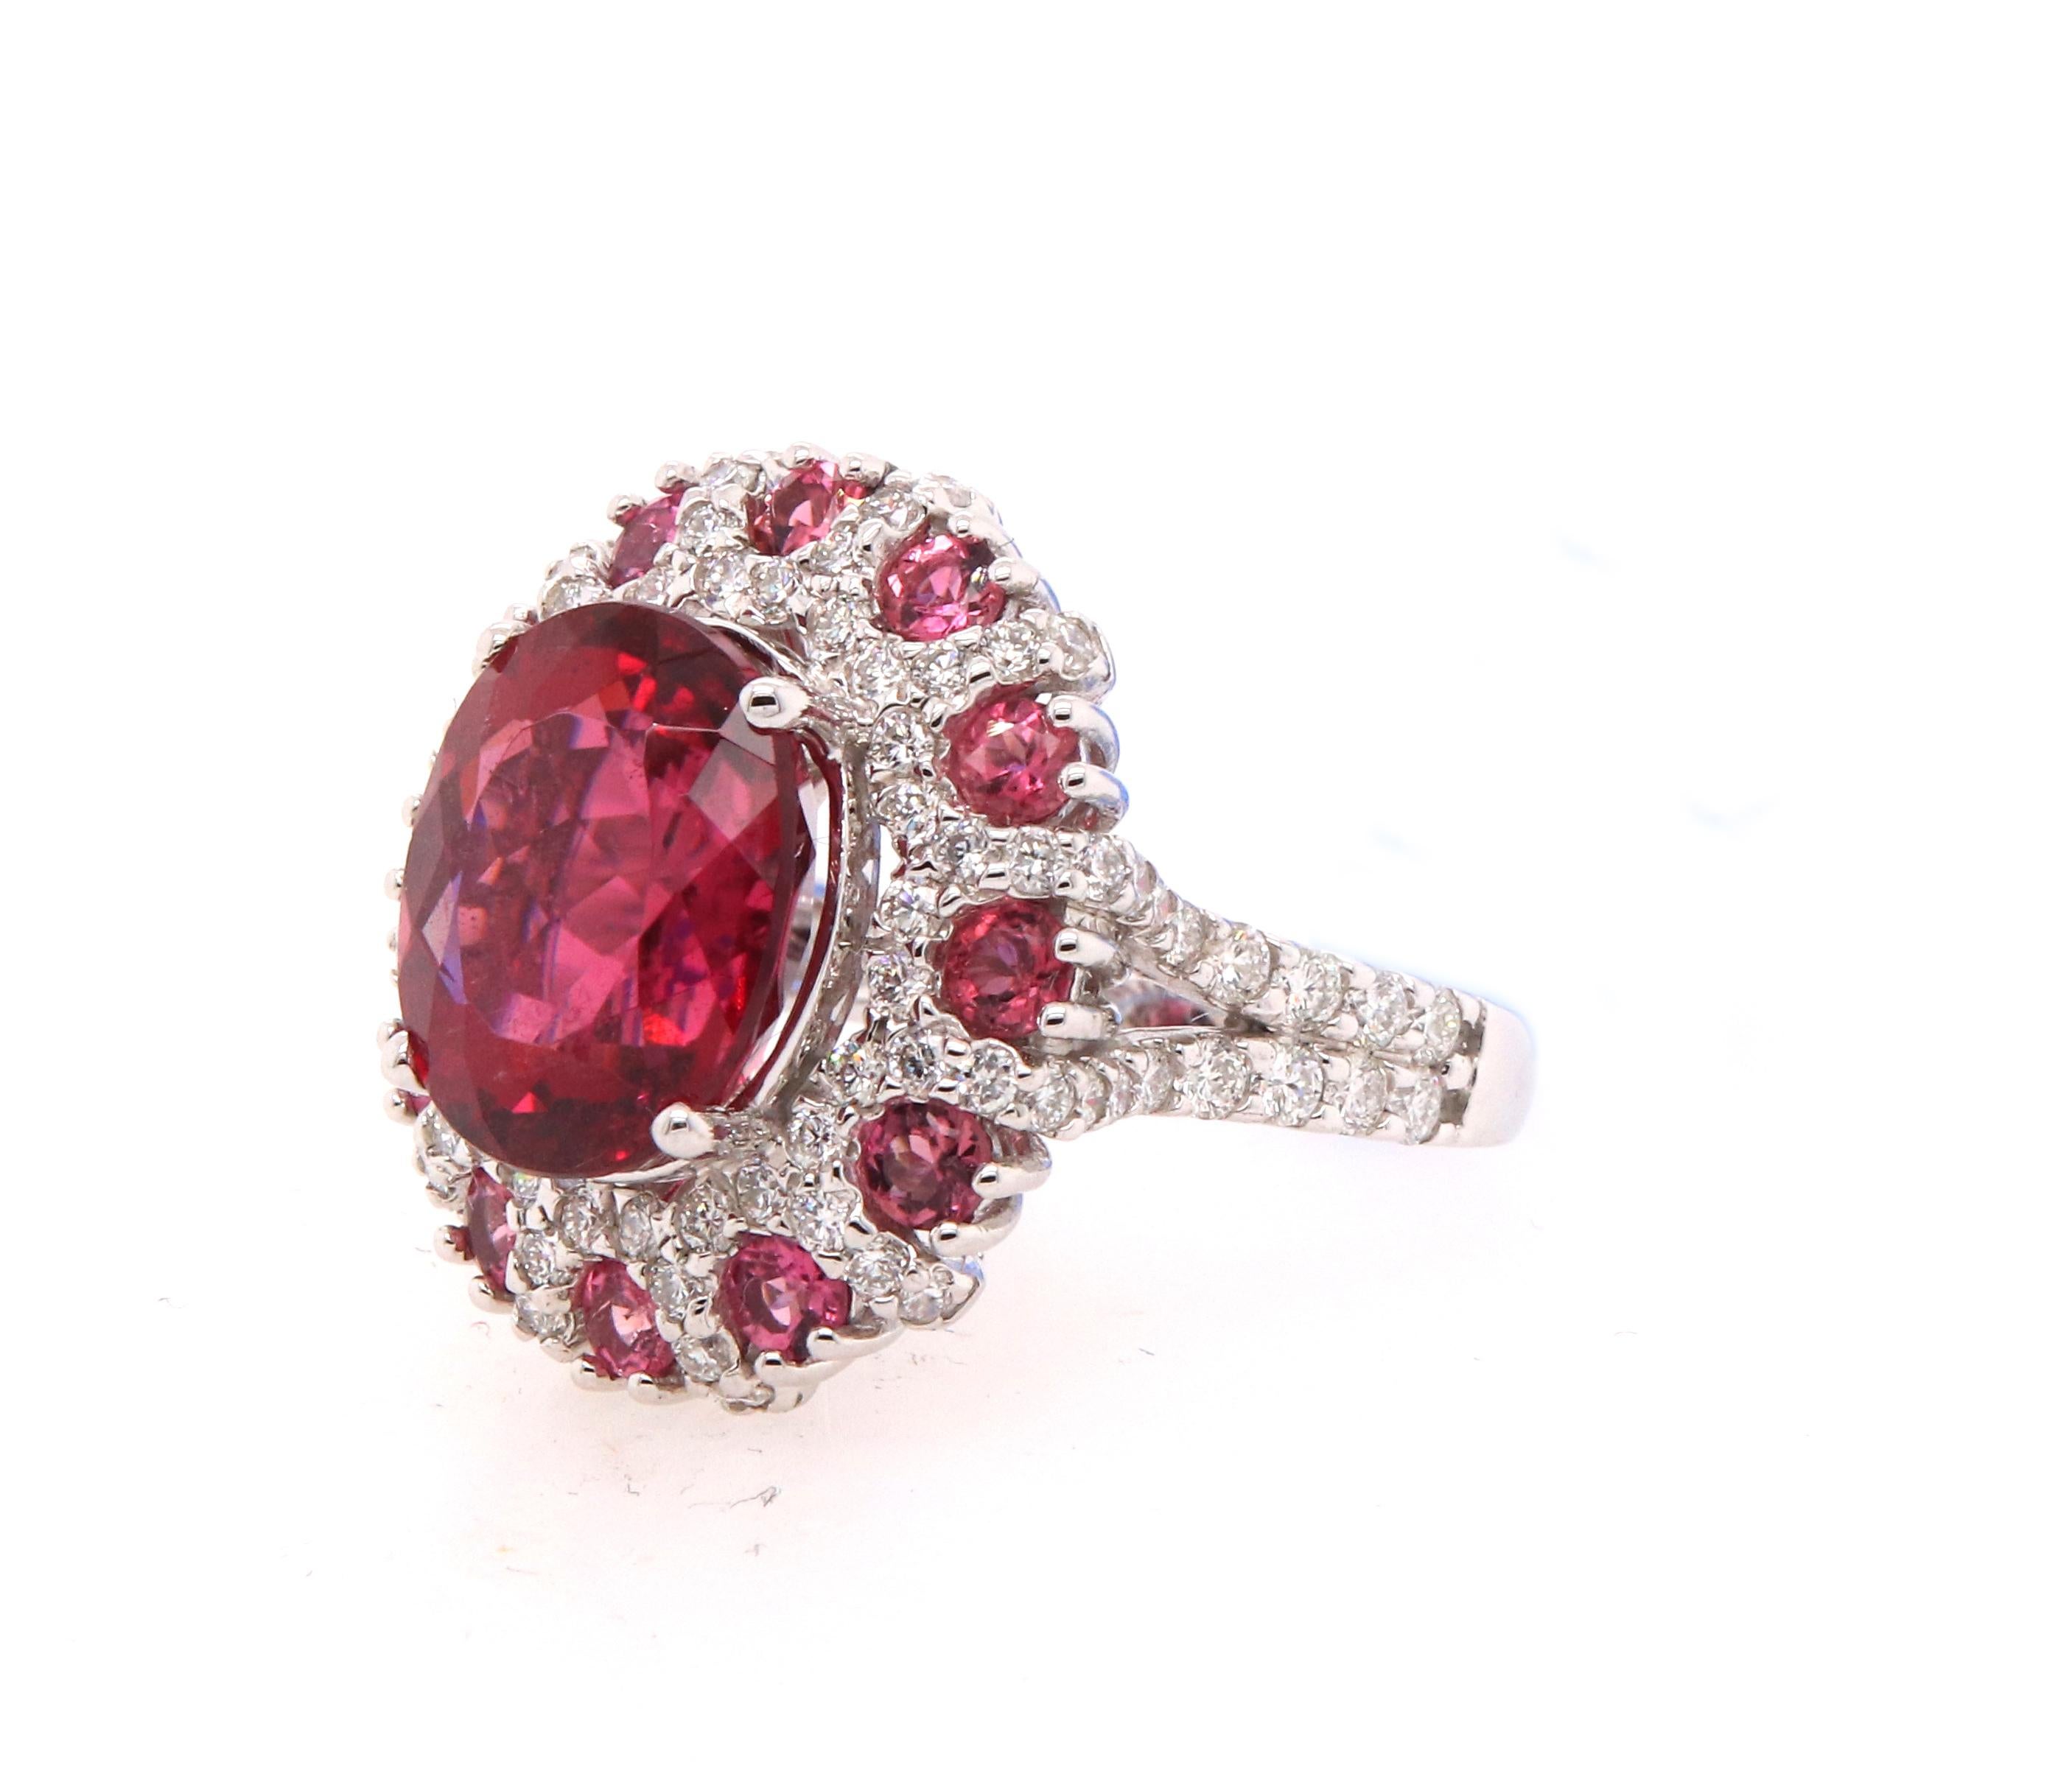 Material: 14k White Gold 
Center Stone Details: 1 Oval Rubellite at 5.57 Carats  - 10 x 11.8 mm
Mounting Stone Details: 12 Round Pink Tourmalines at 0.81 Carats
Diamond Details: 88 Round White Diamonds Approximately 1.16 Carats - Clarity: SI /